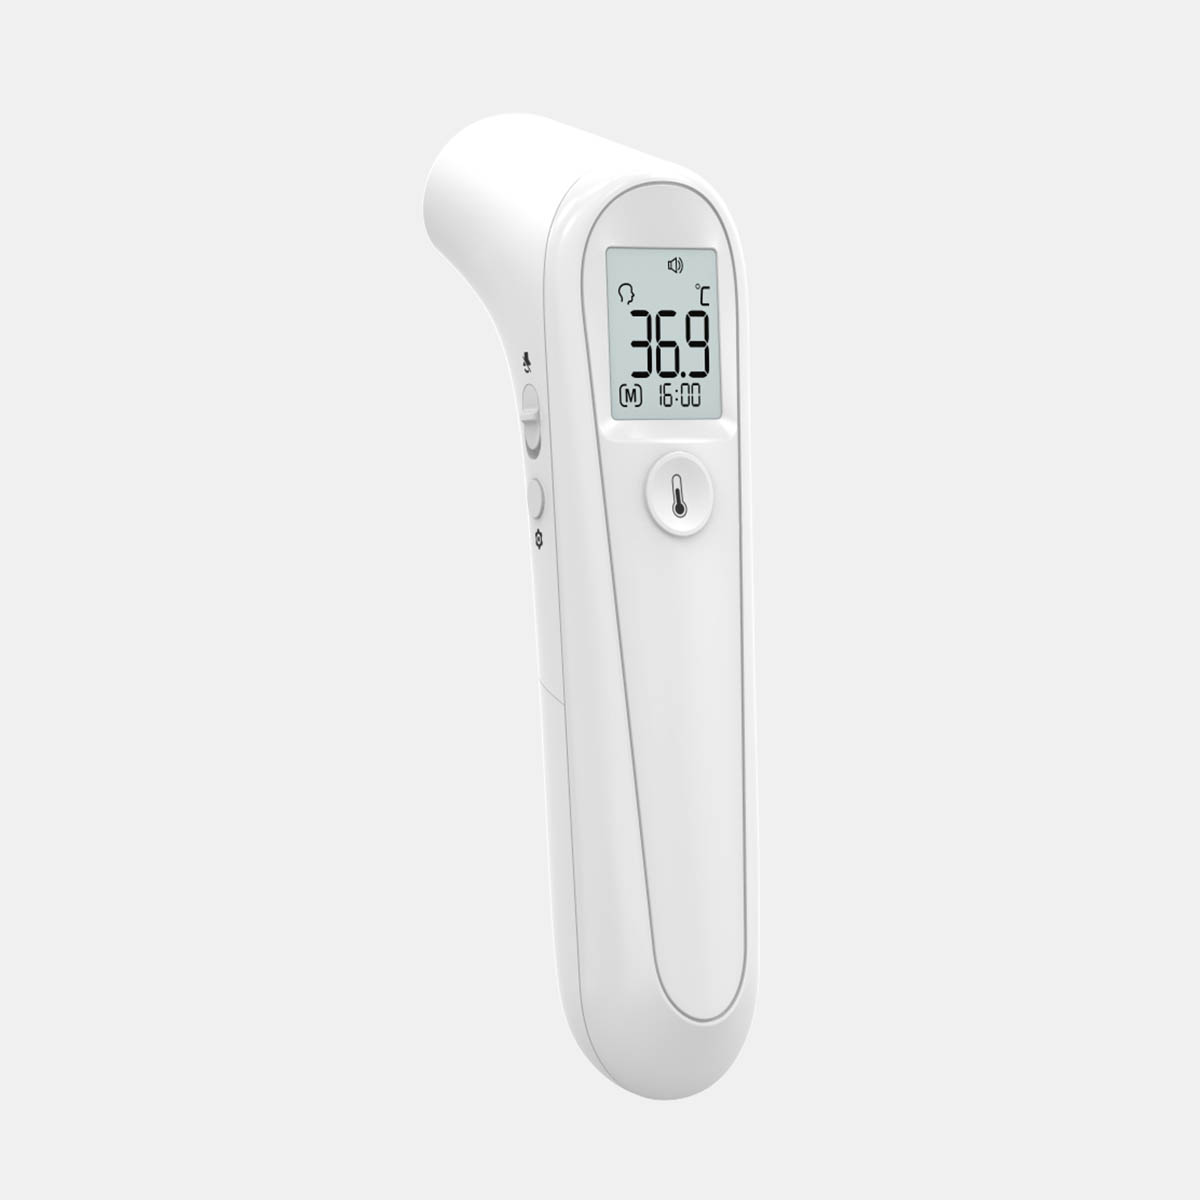 Inaprubahan ng CE MDR ang Non Contact Medical Digital Infrared Thermometer Baby Forehead Thermometer